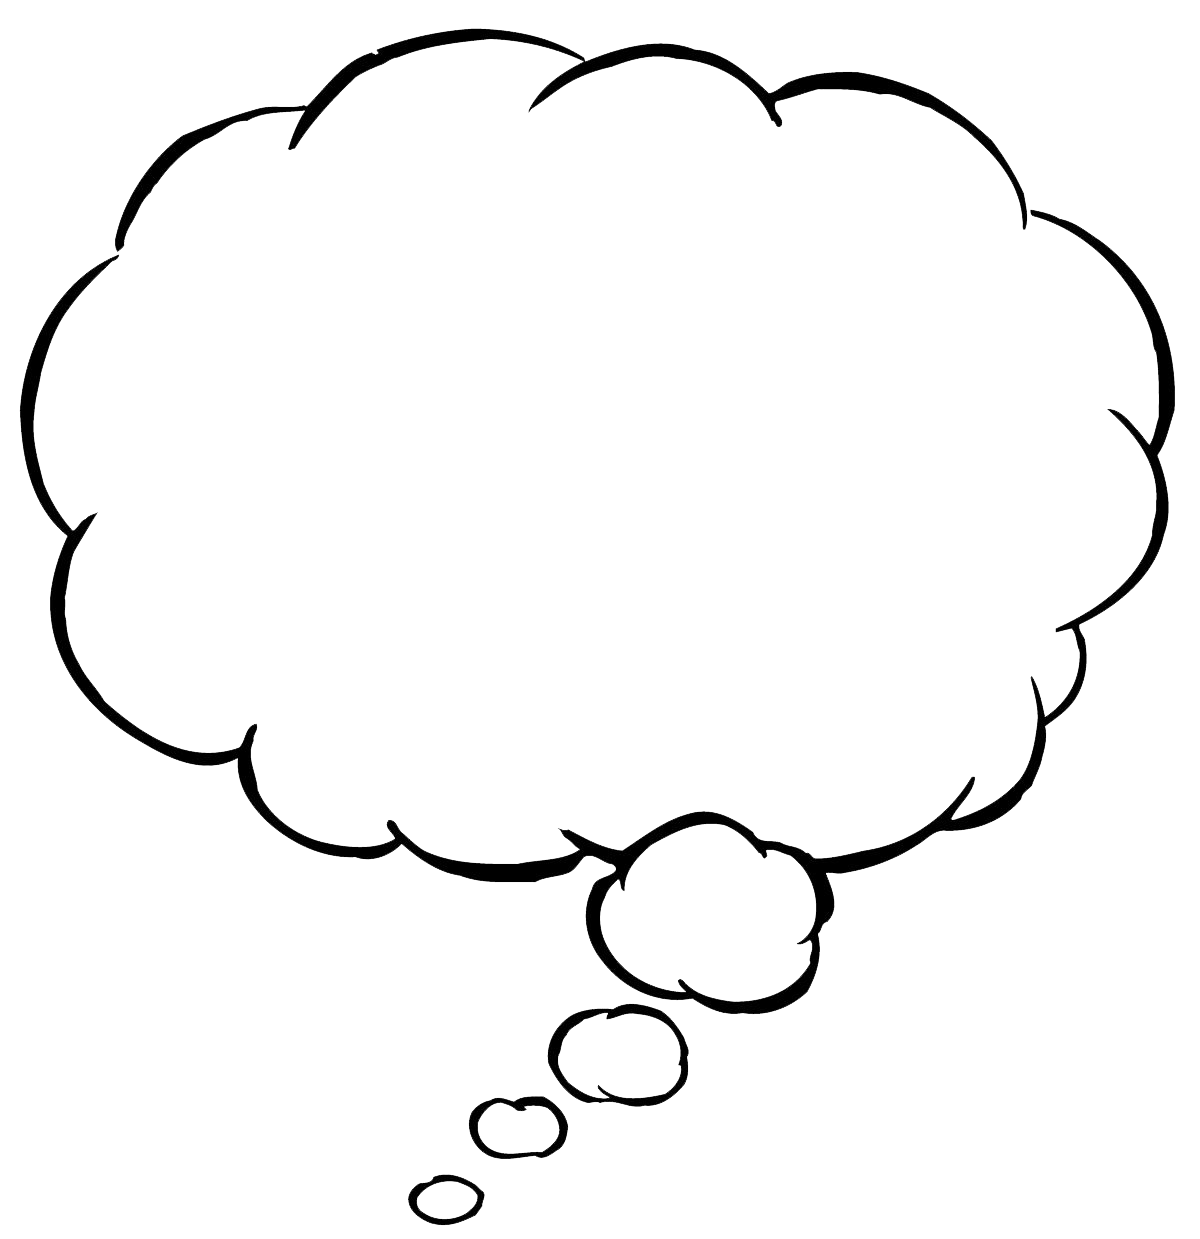 Kid With Thought Bubble Png - Thought Bubble Png, Transparent background PNG HD thumbnail